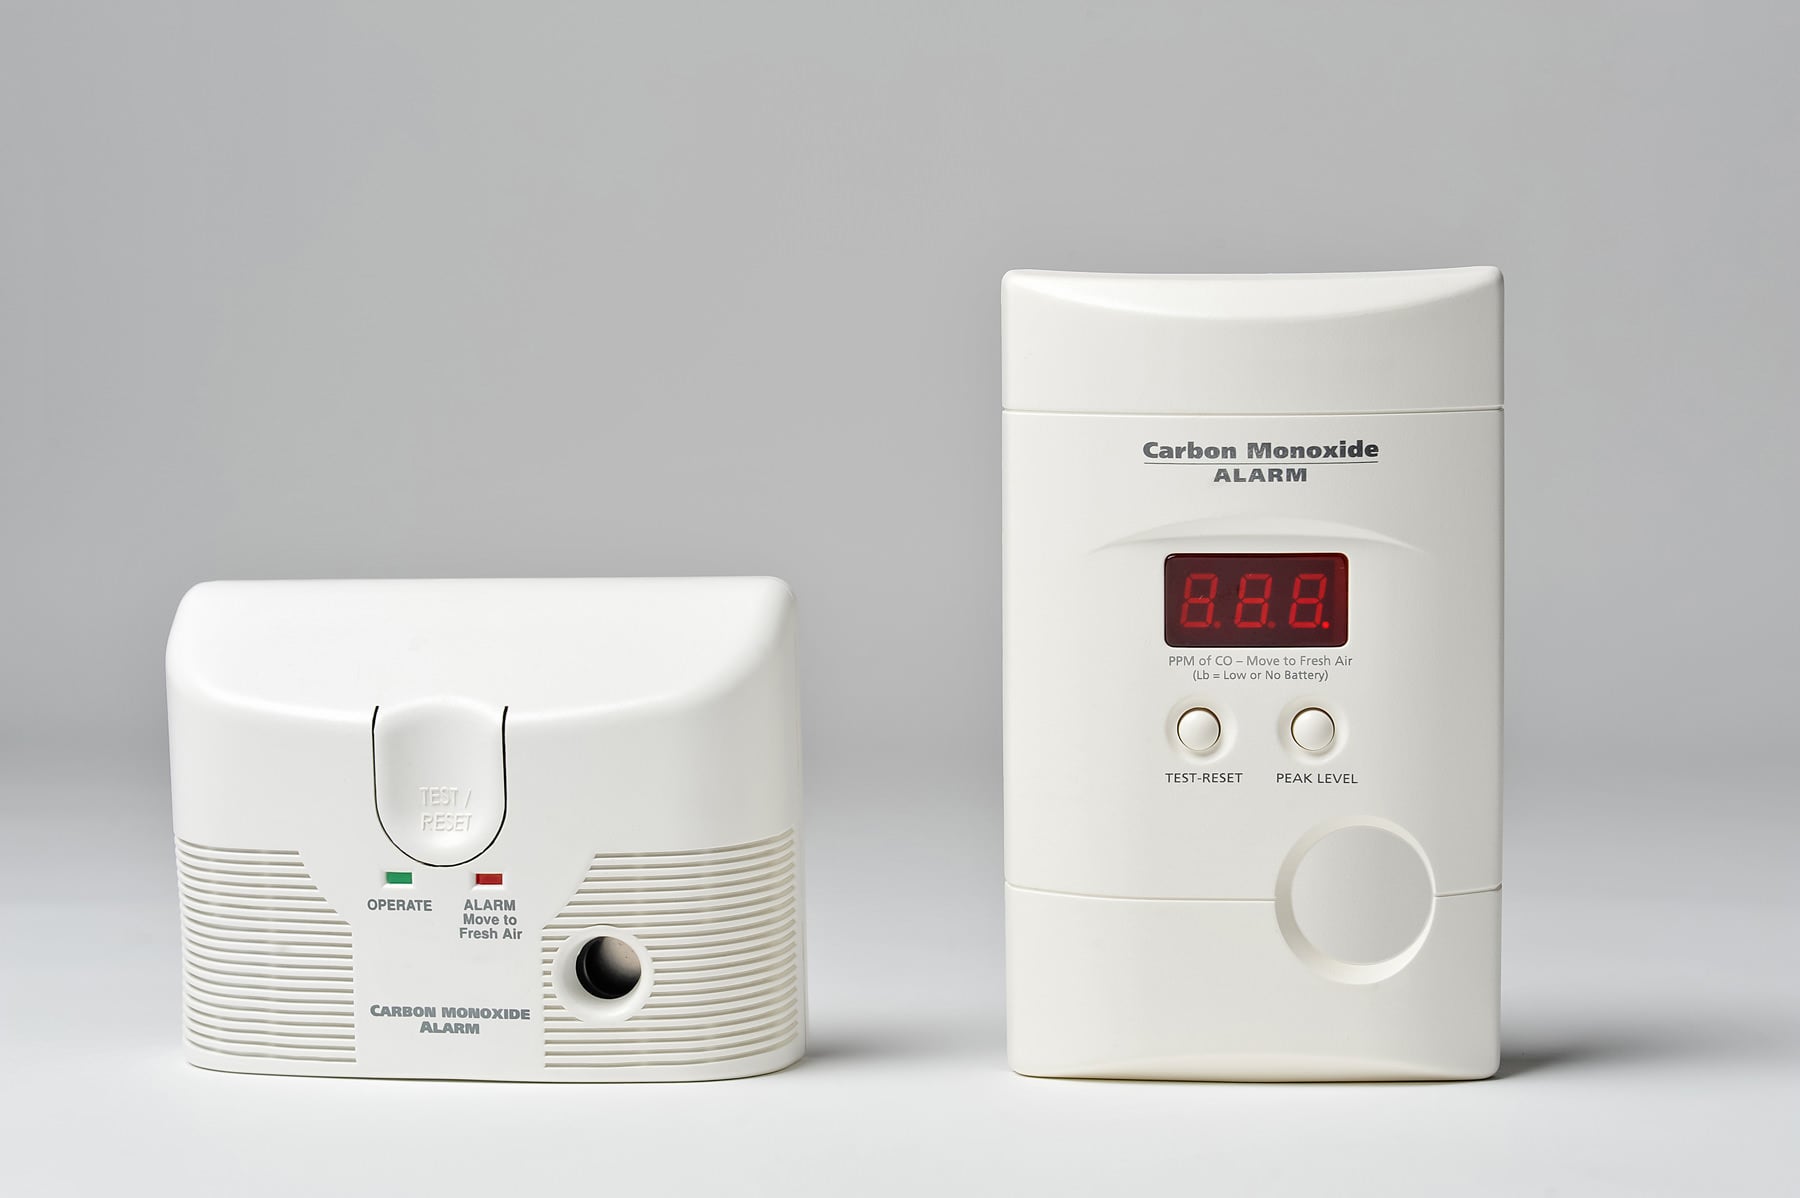 OHFA Mandates Carbon Monoxide Detectors In Units Occupied by Section 8 Residents